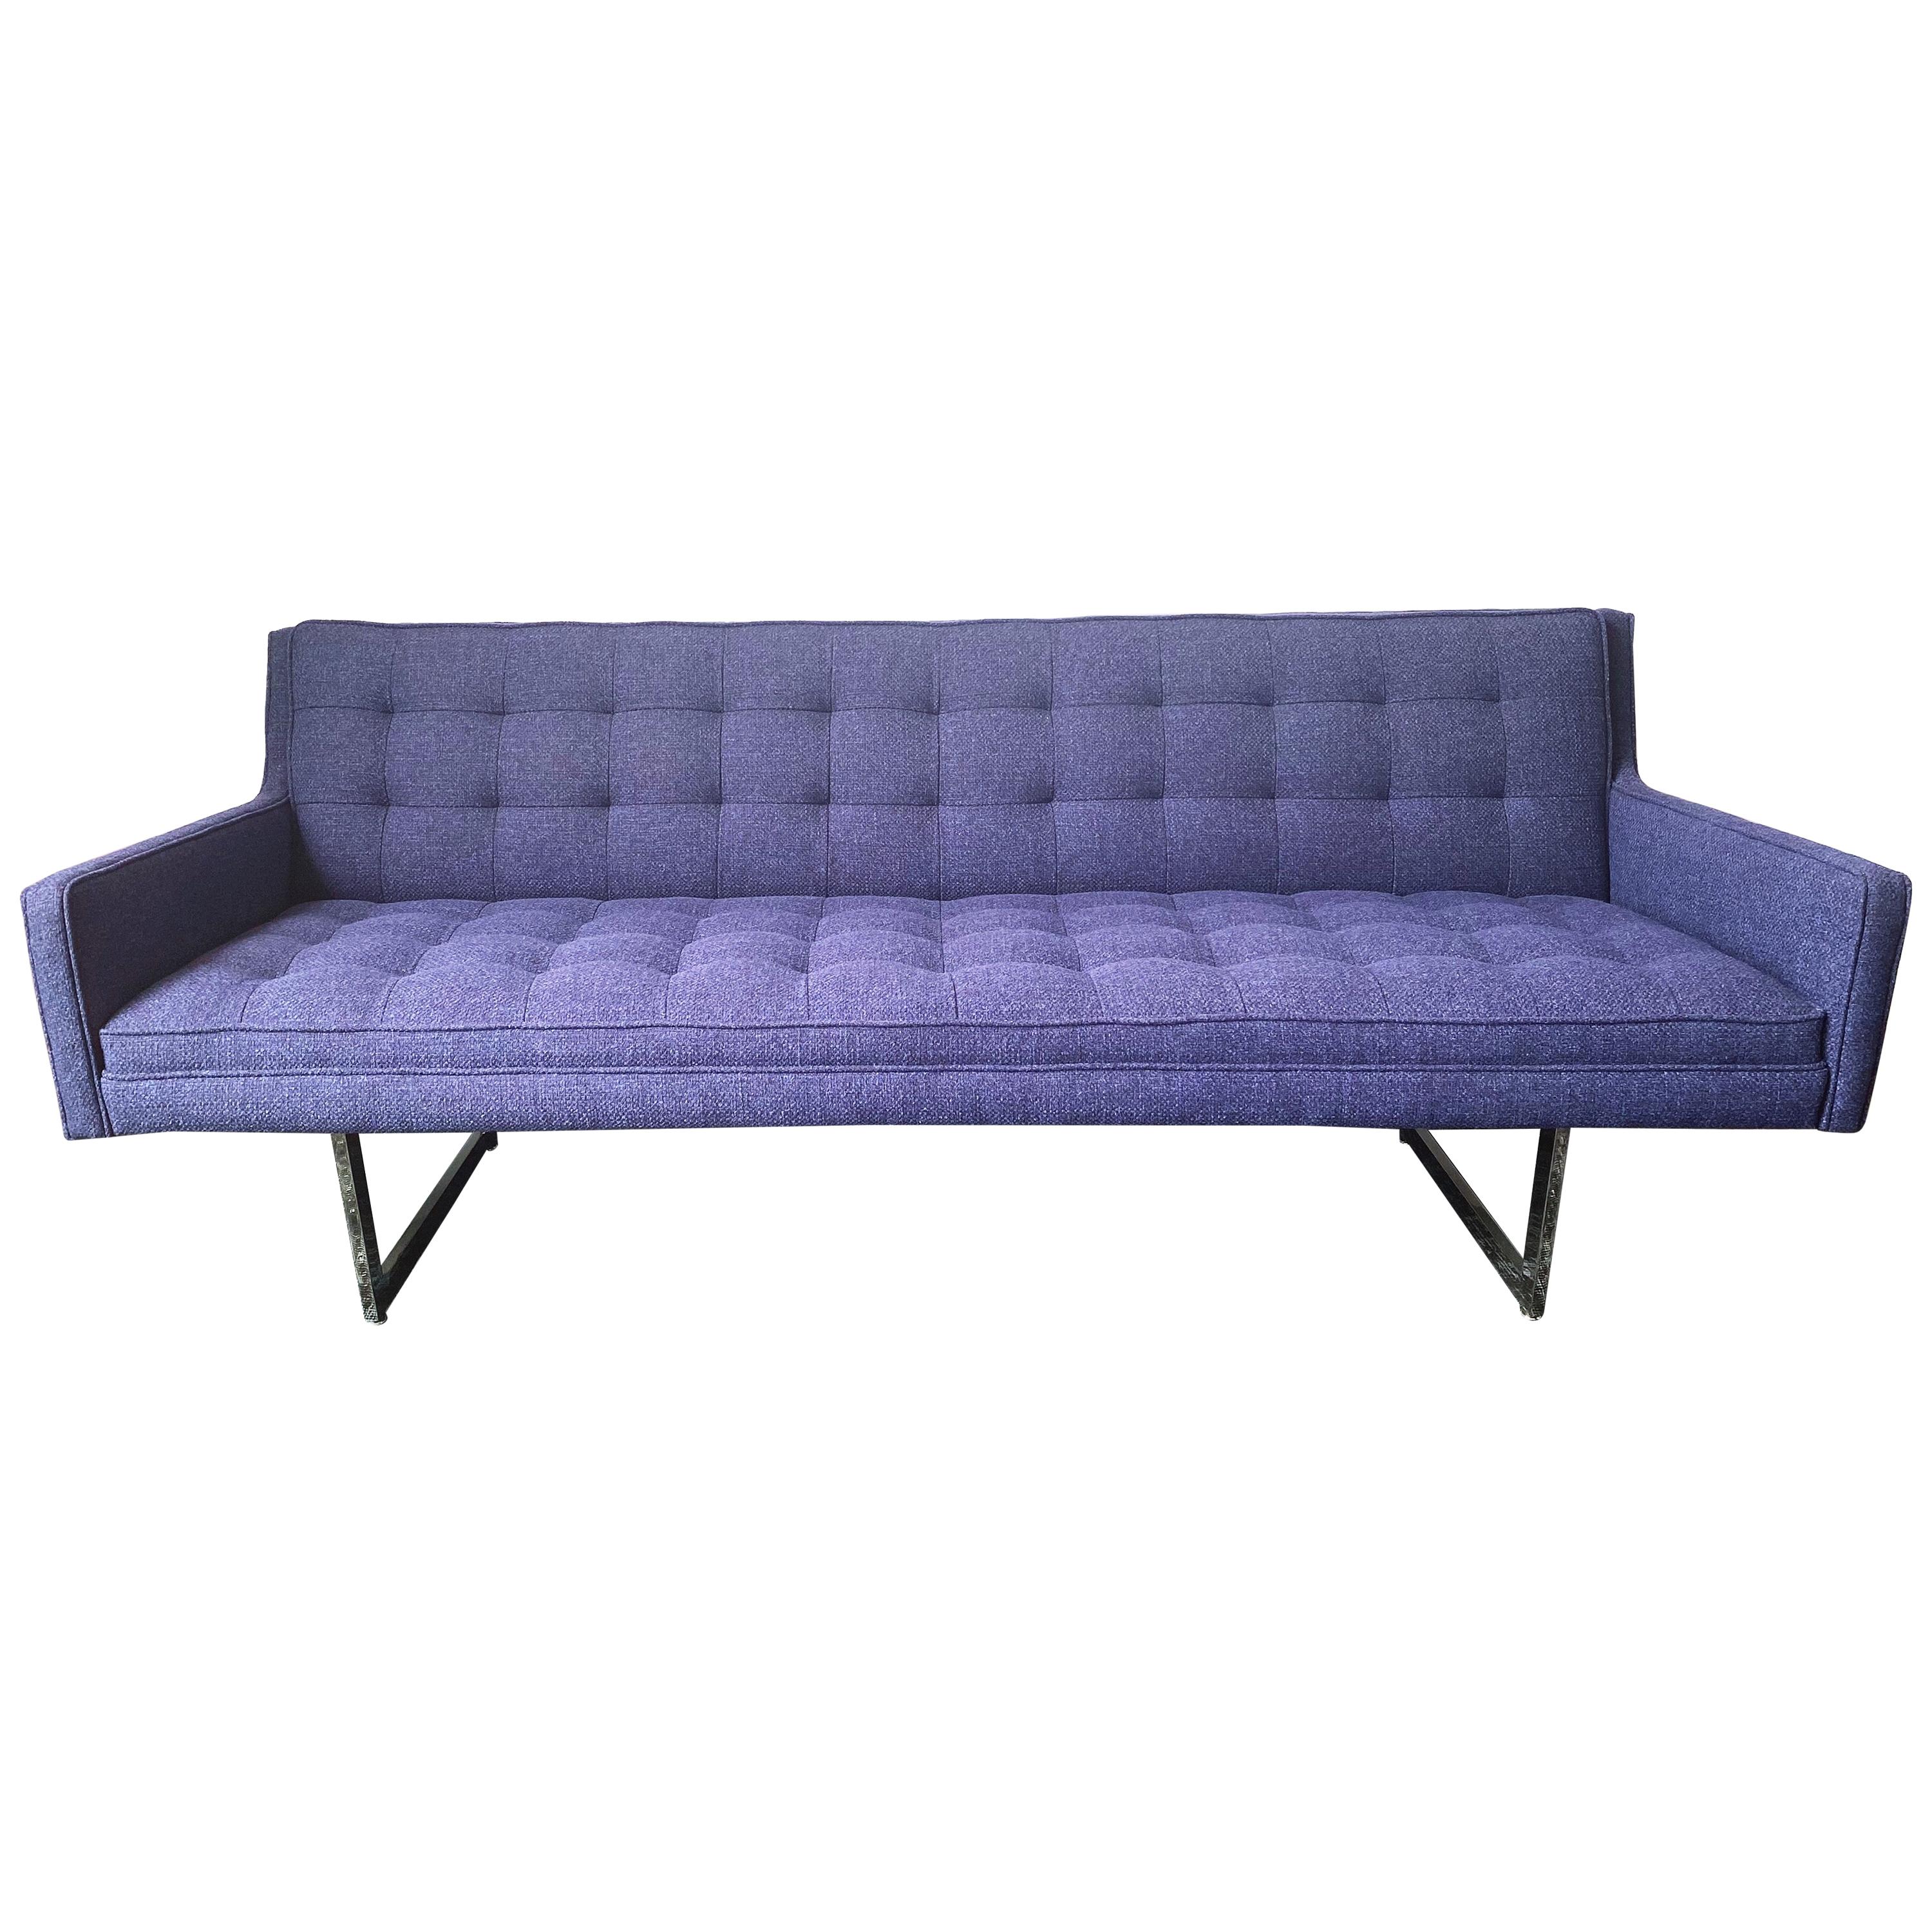 Mid-Century Modern Patrician Wool Tufted Sofa with Chrome Sled Base, circa 1970s